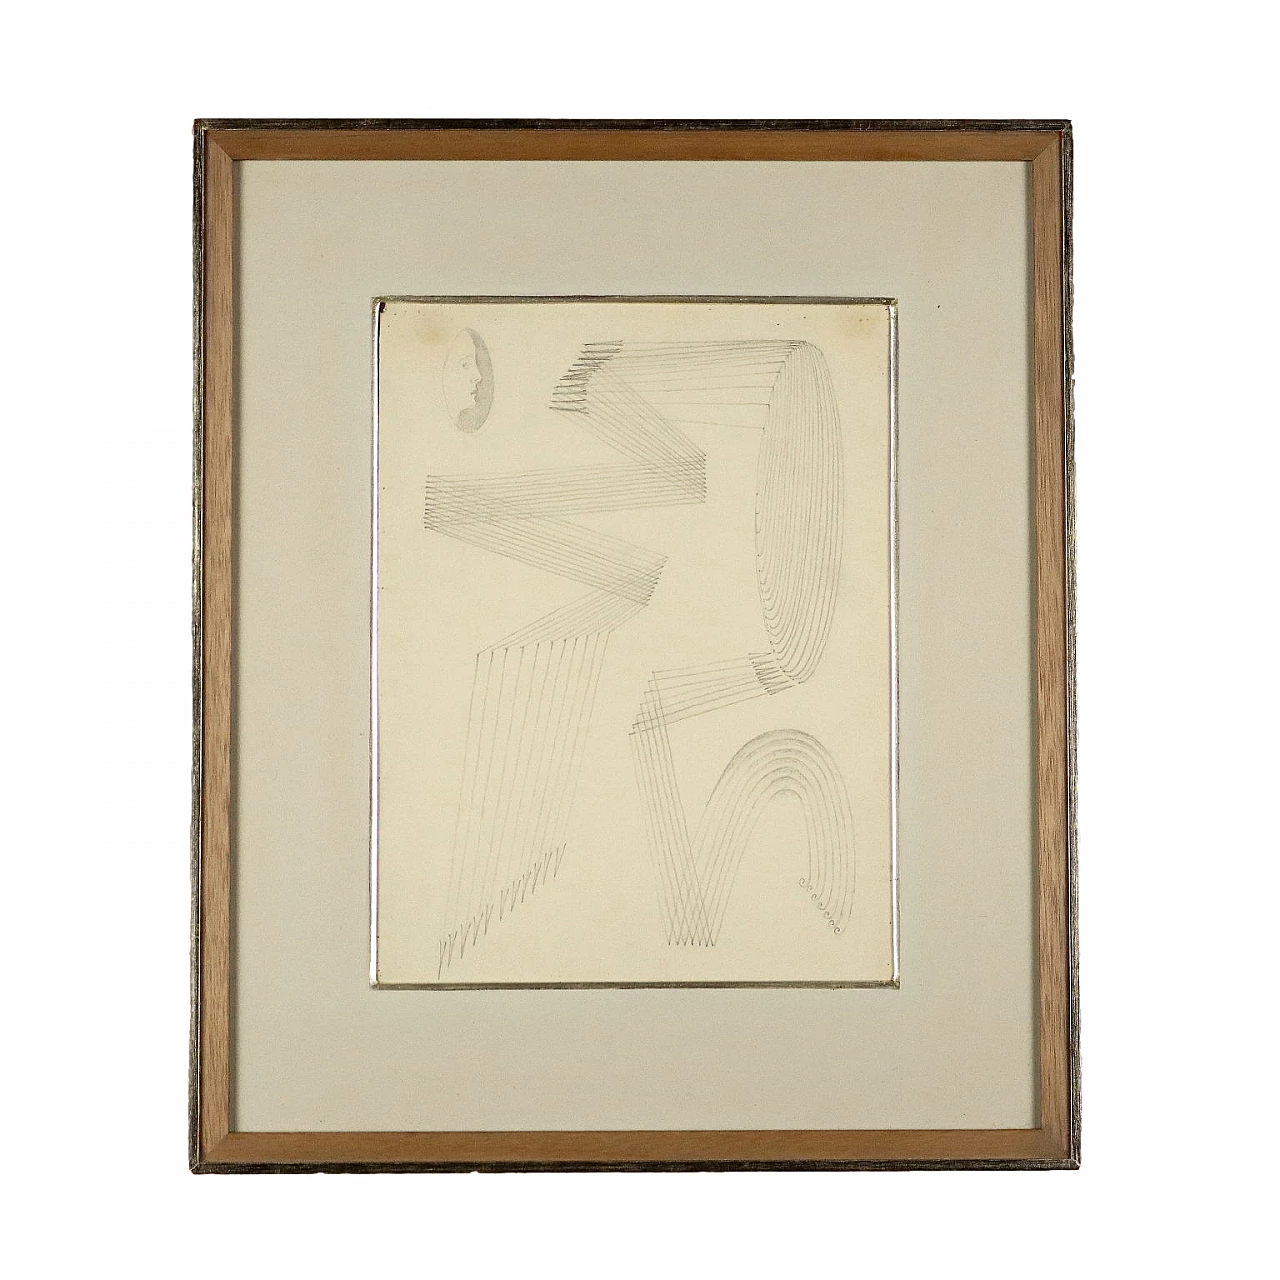 Fausto Melotti, abstract subject, pencil on paper, 1972 1